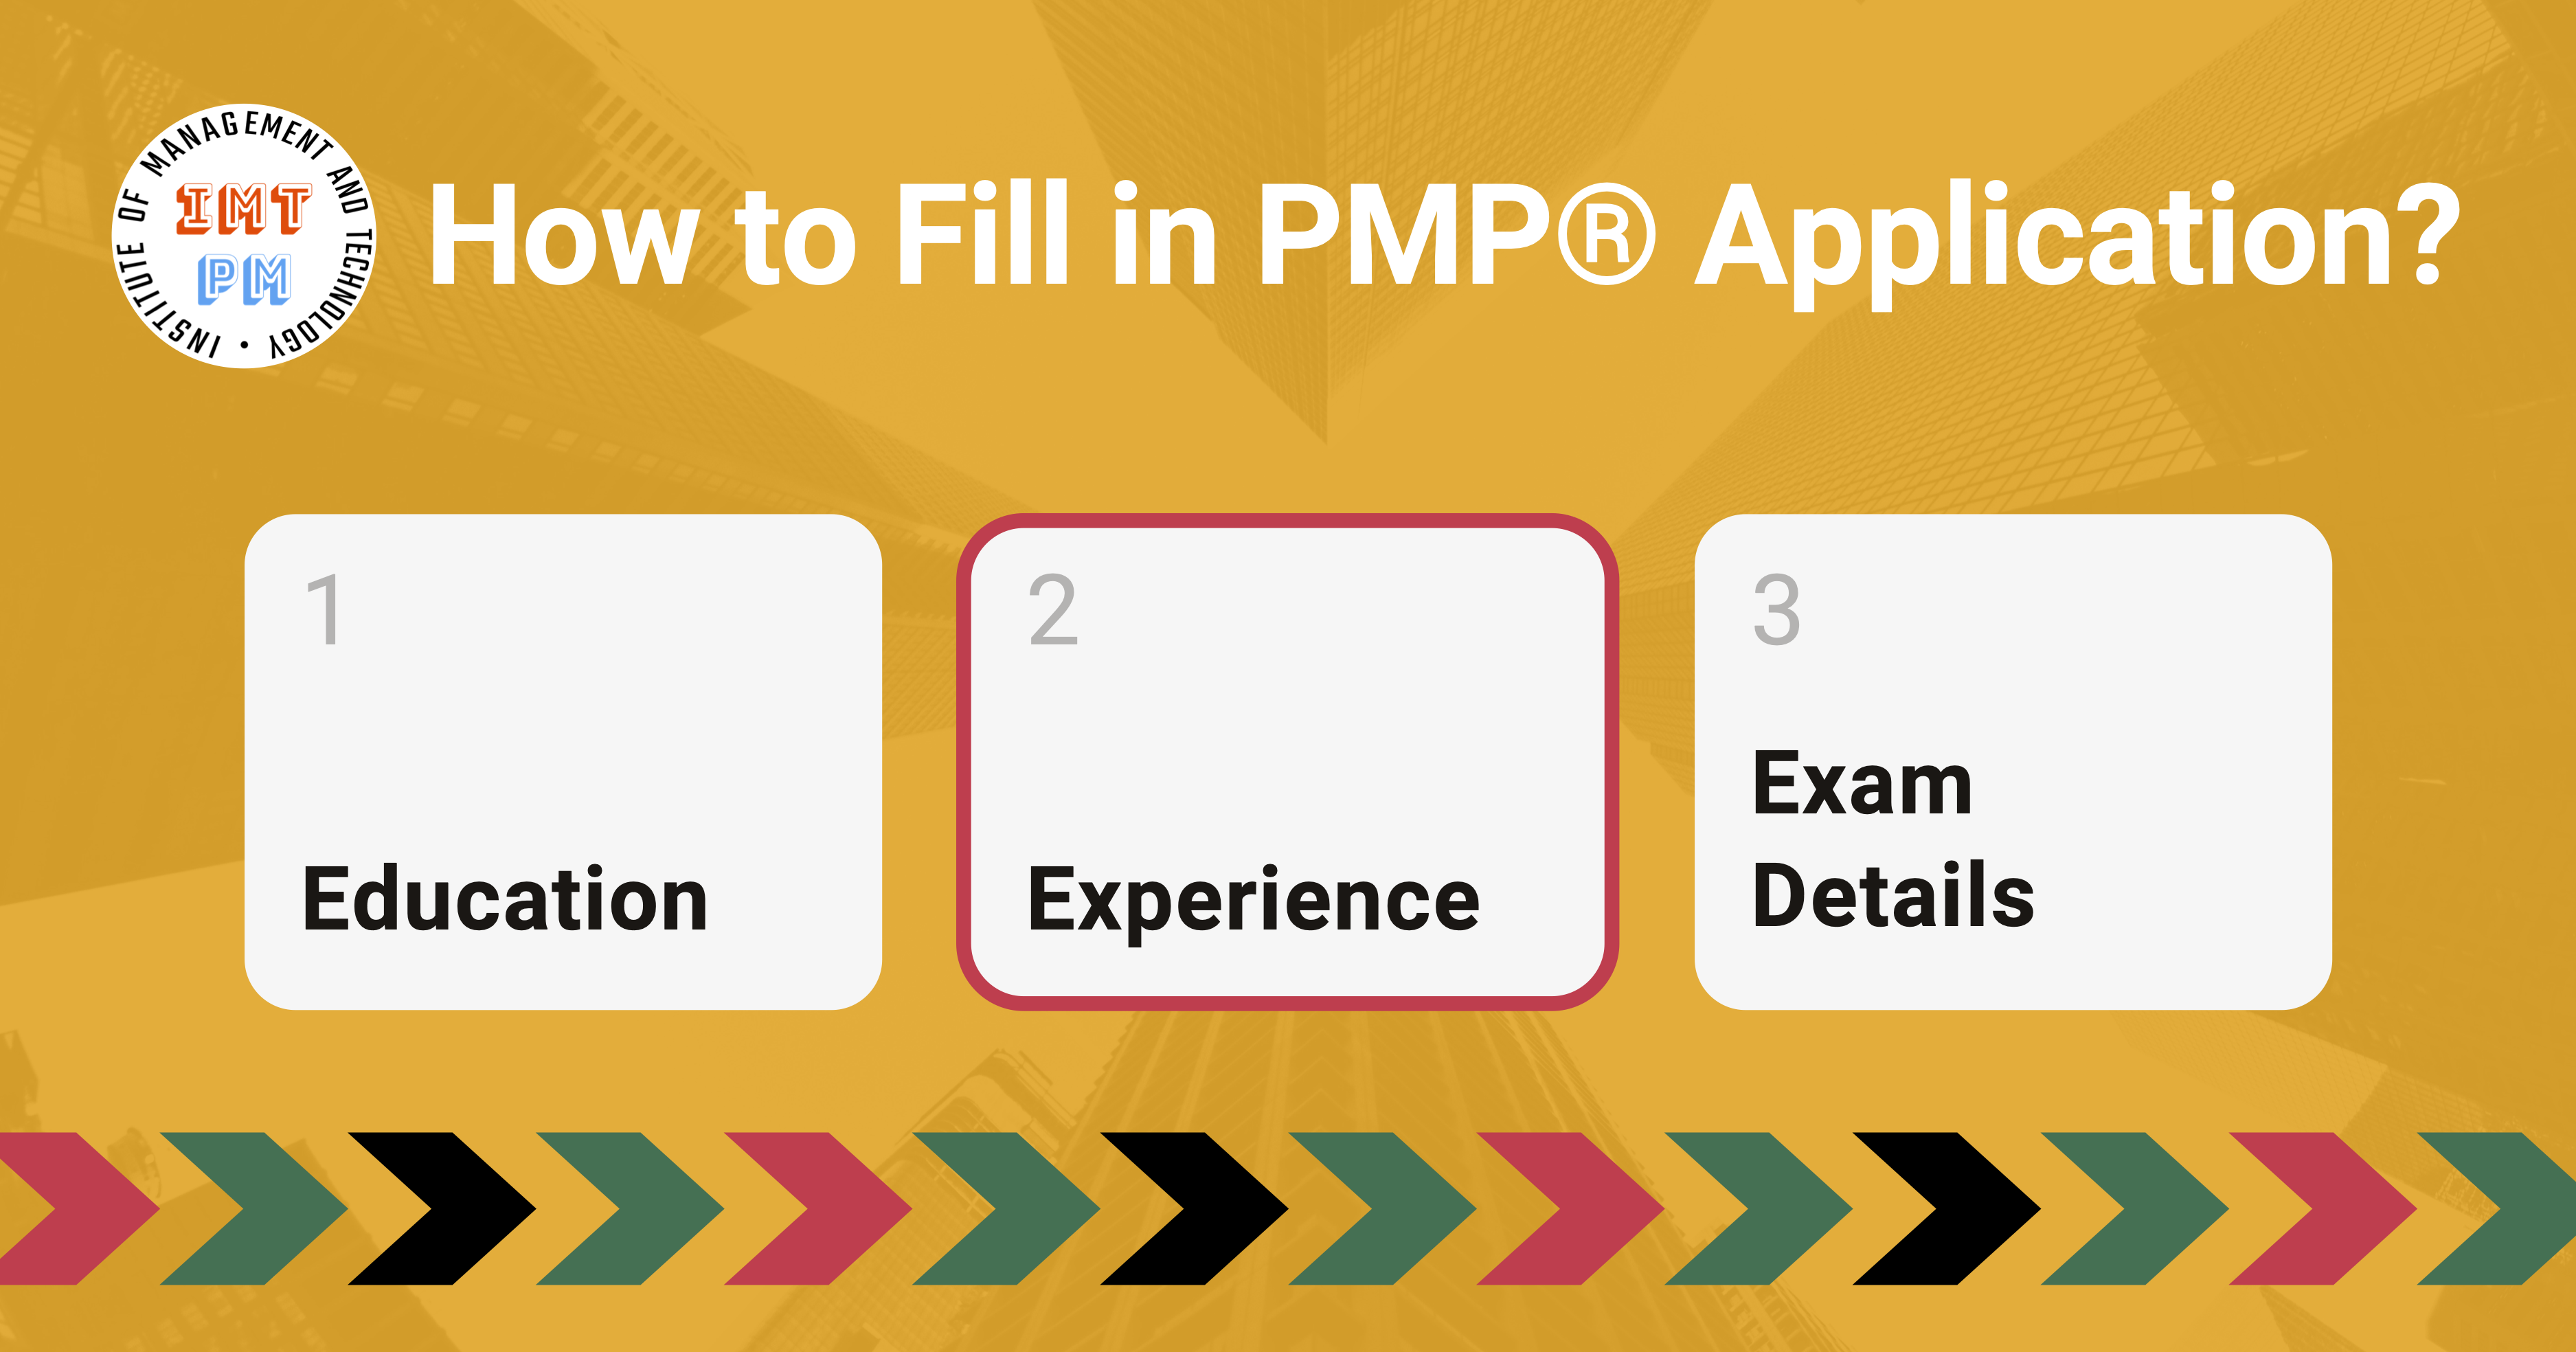 35-pdus-pmp-exam-prep-discipline-agile-dasm-dassm-how-to-fill-in-PMP-application-experience